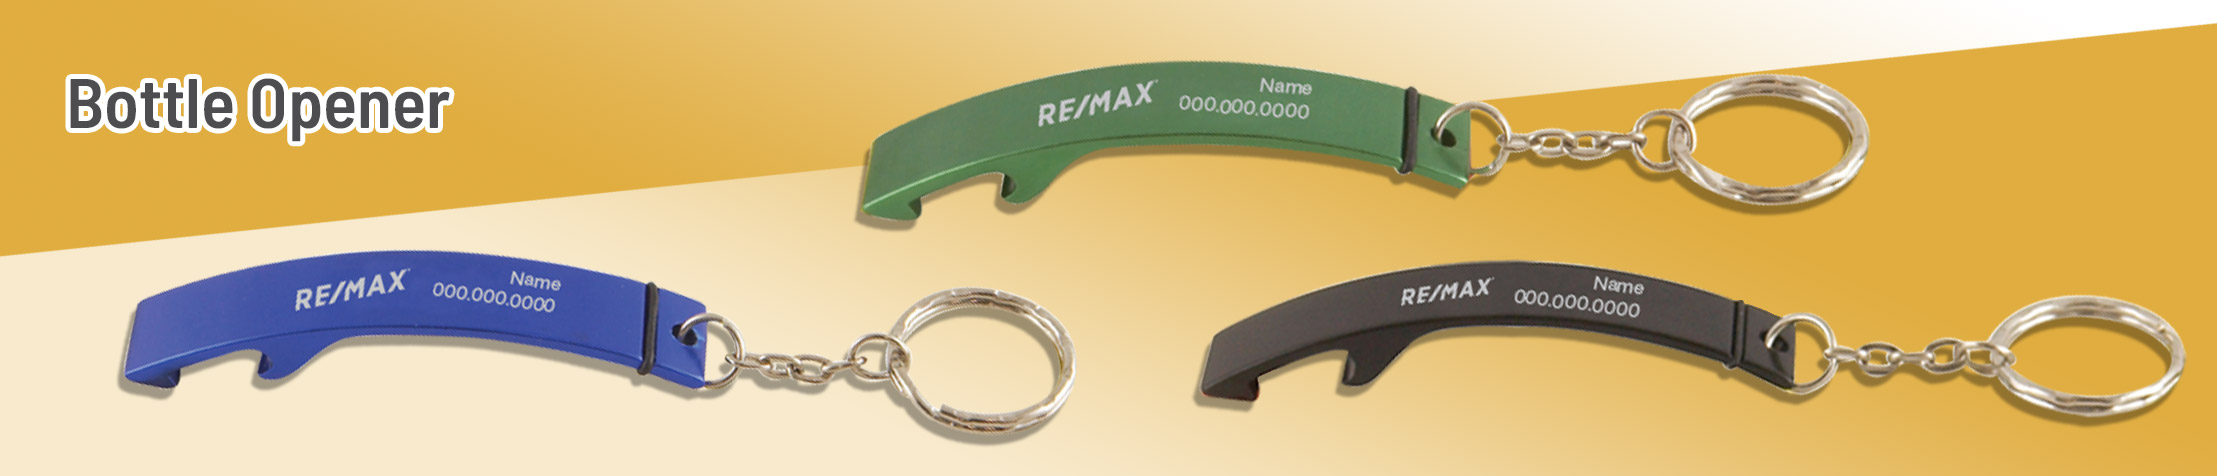 RE/MAX Real Estate Bottle Opener - RE/MAX personalized realtor promotional products | Sparkprint.com